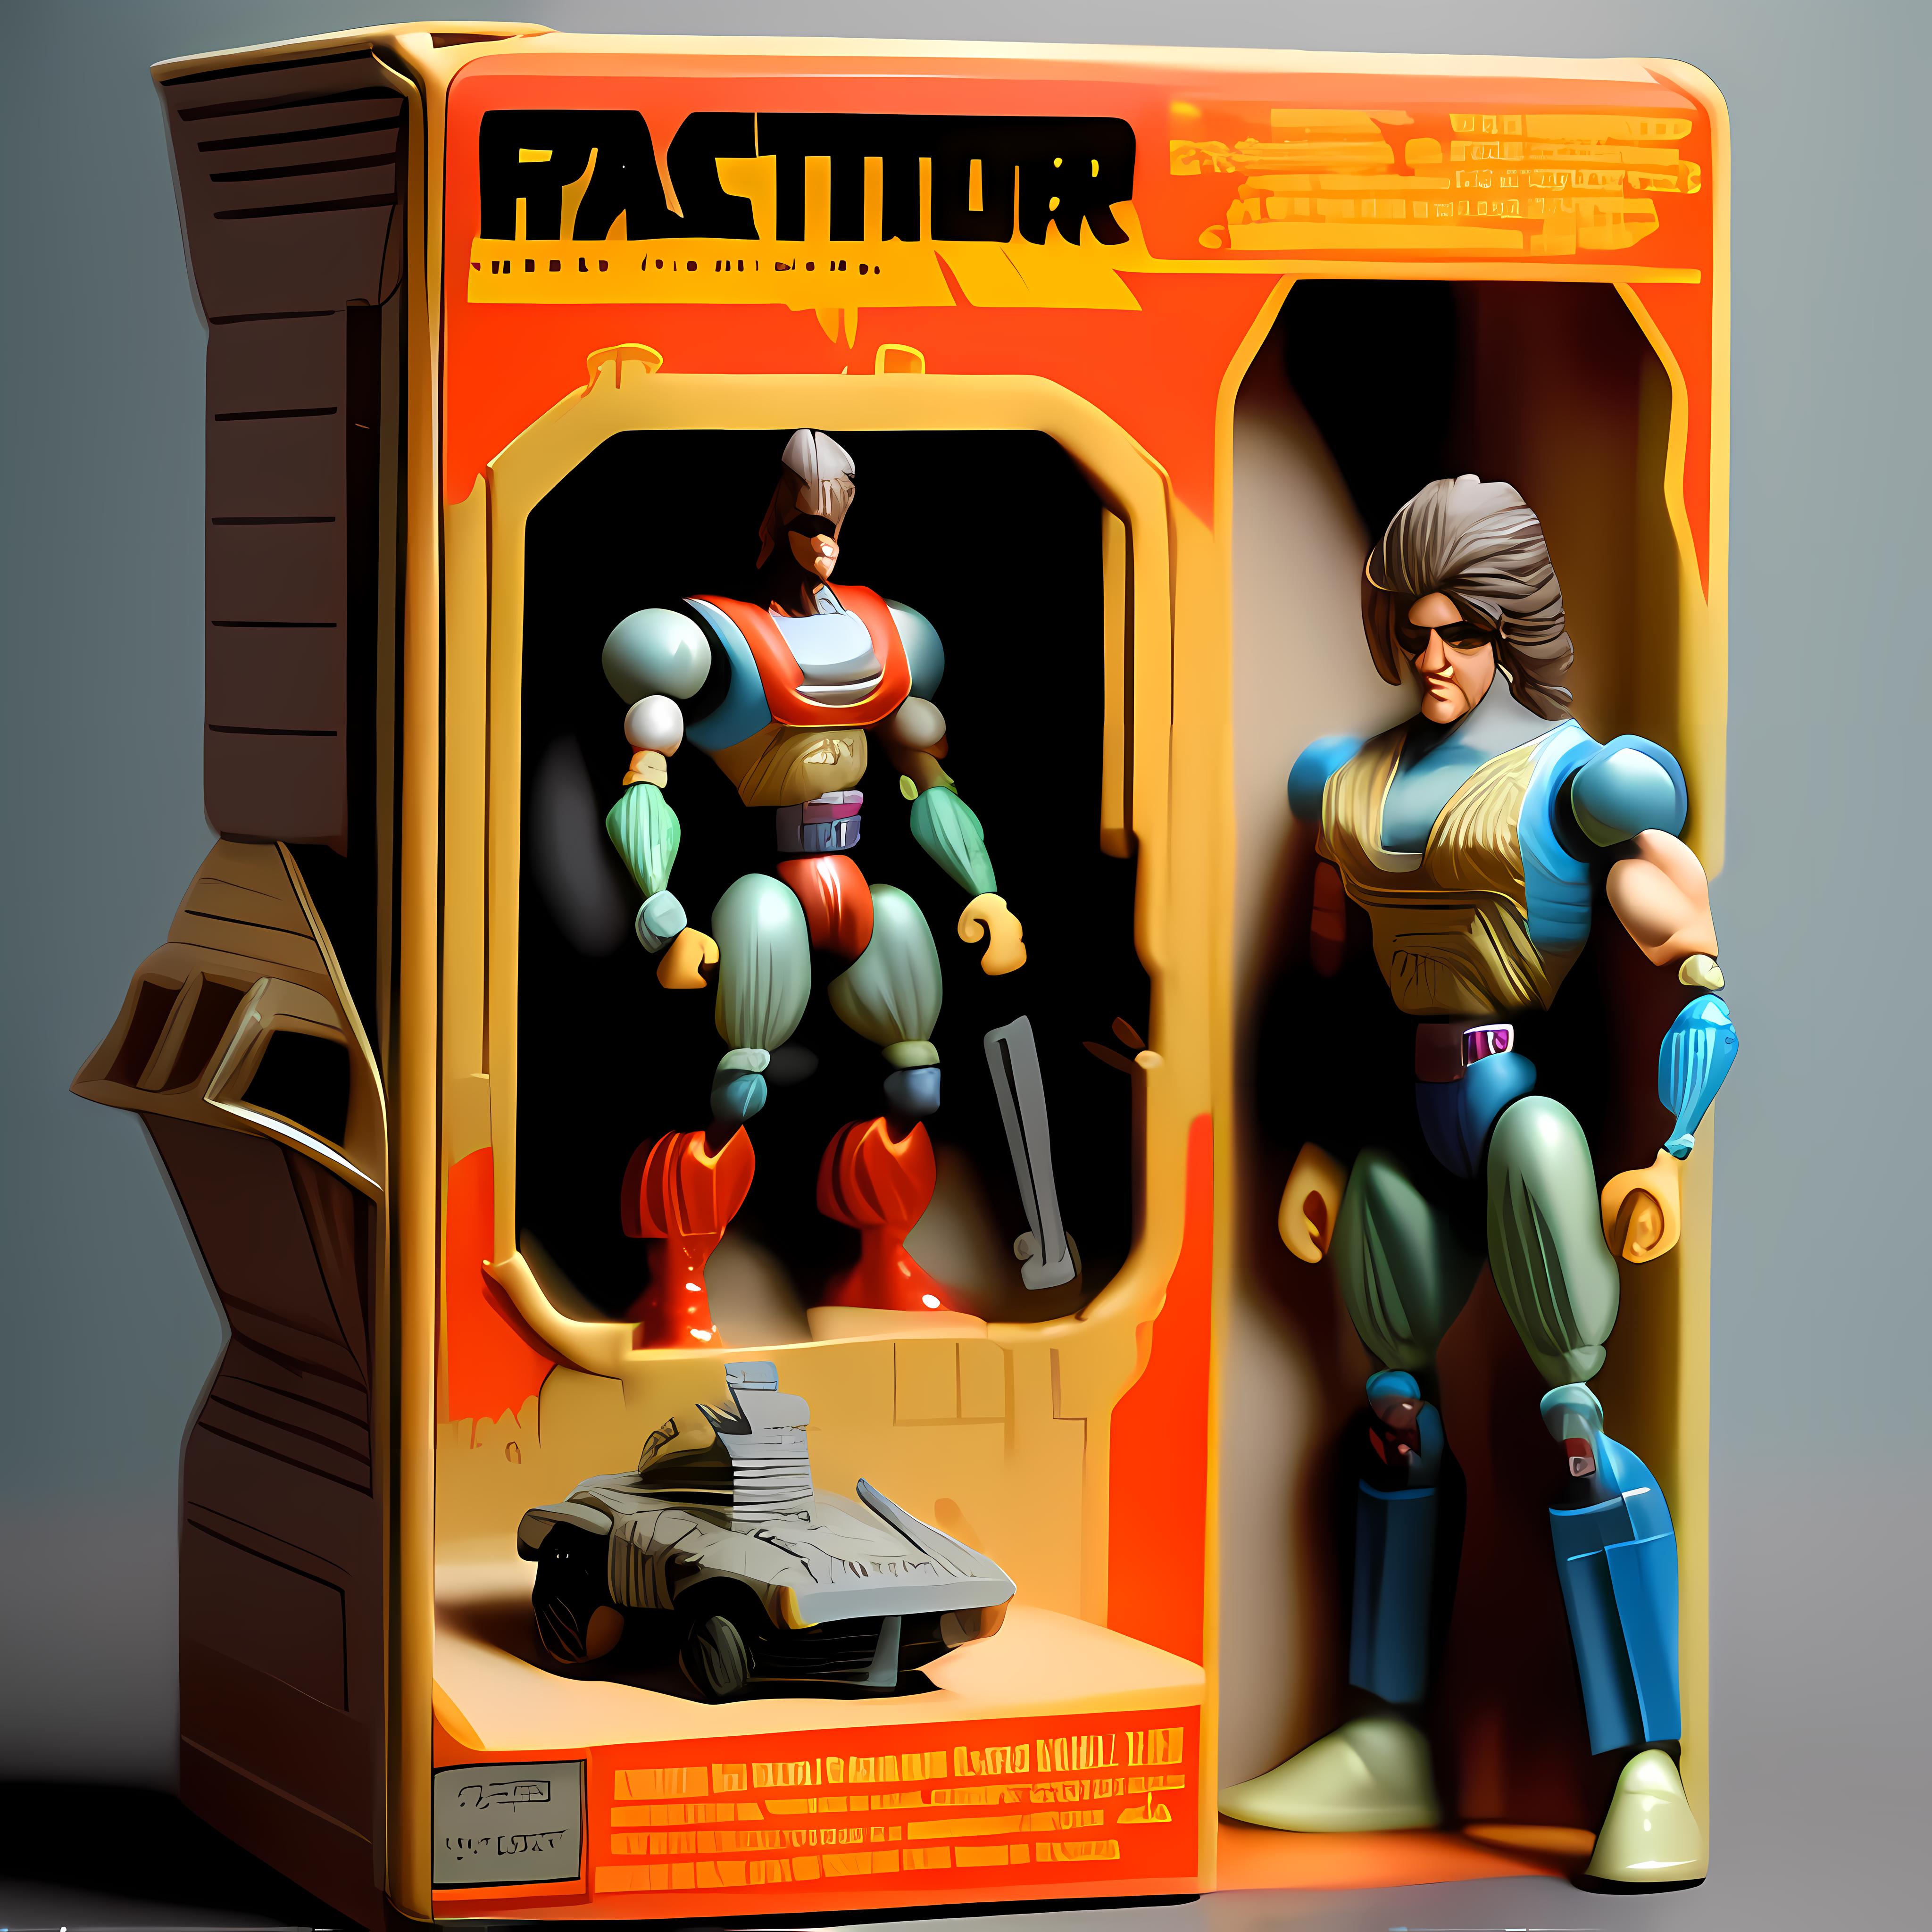 1987 Action Figure Playset Packaging image by Steeltron2000